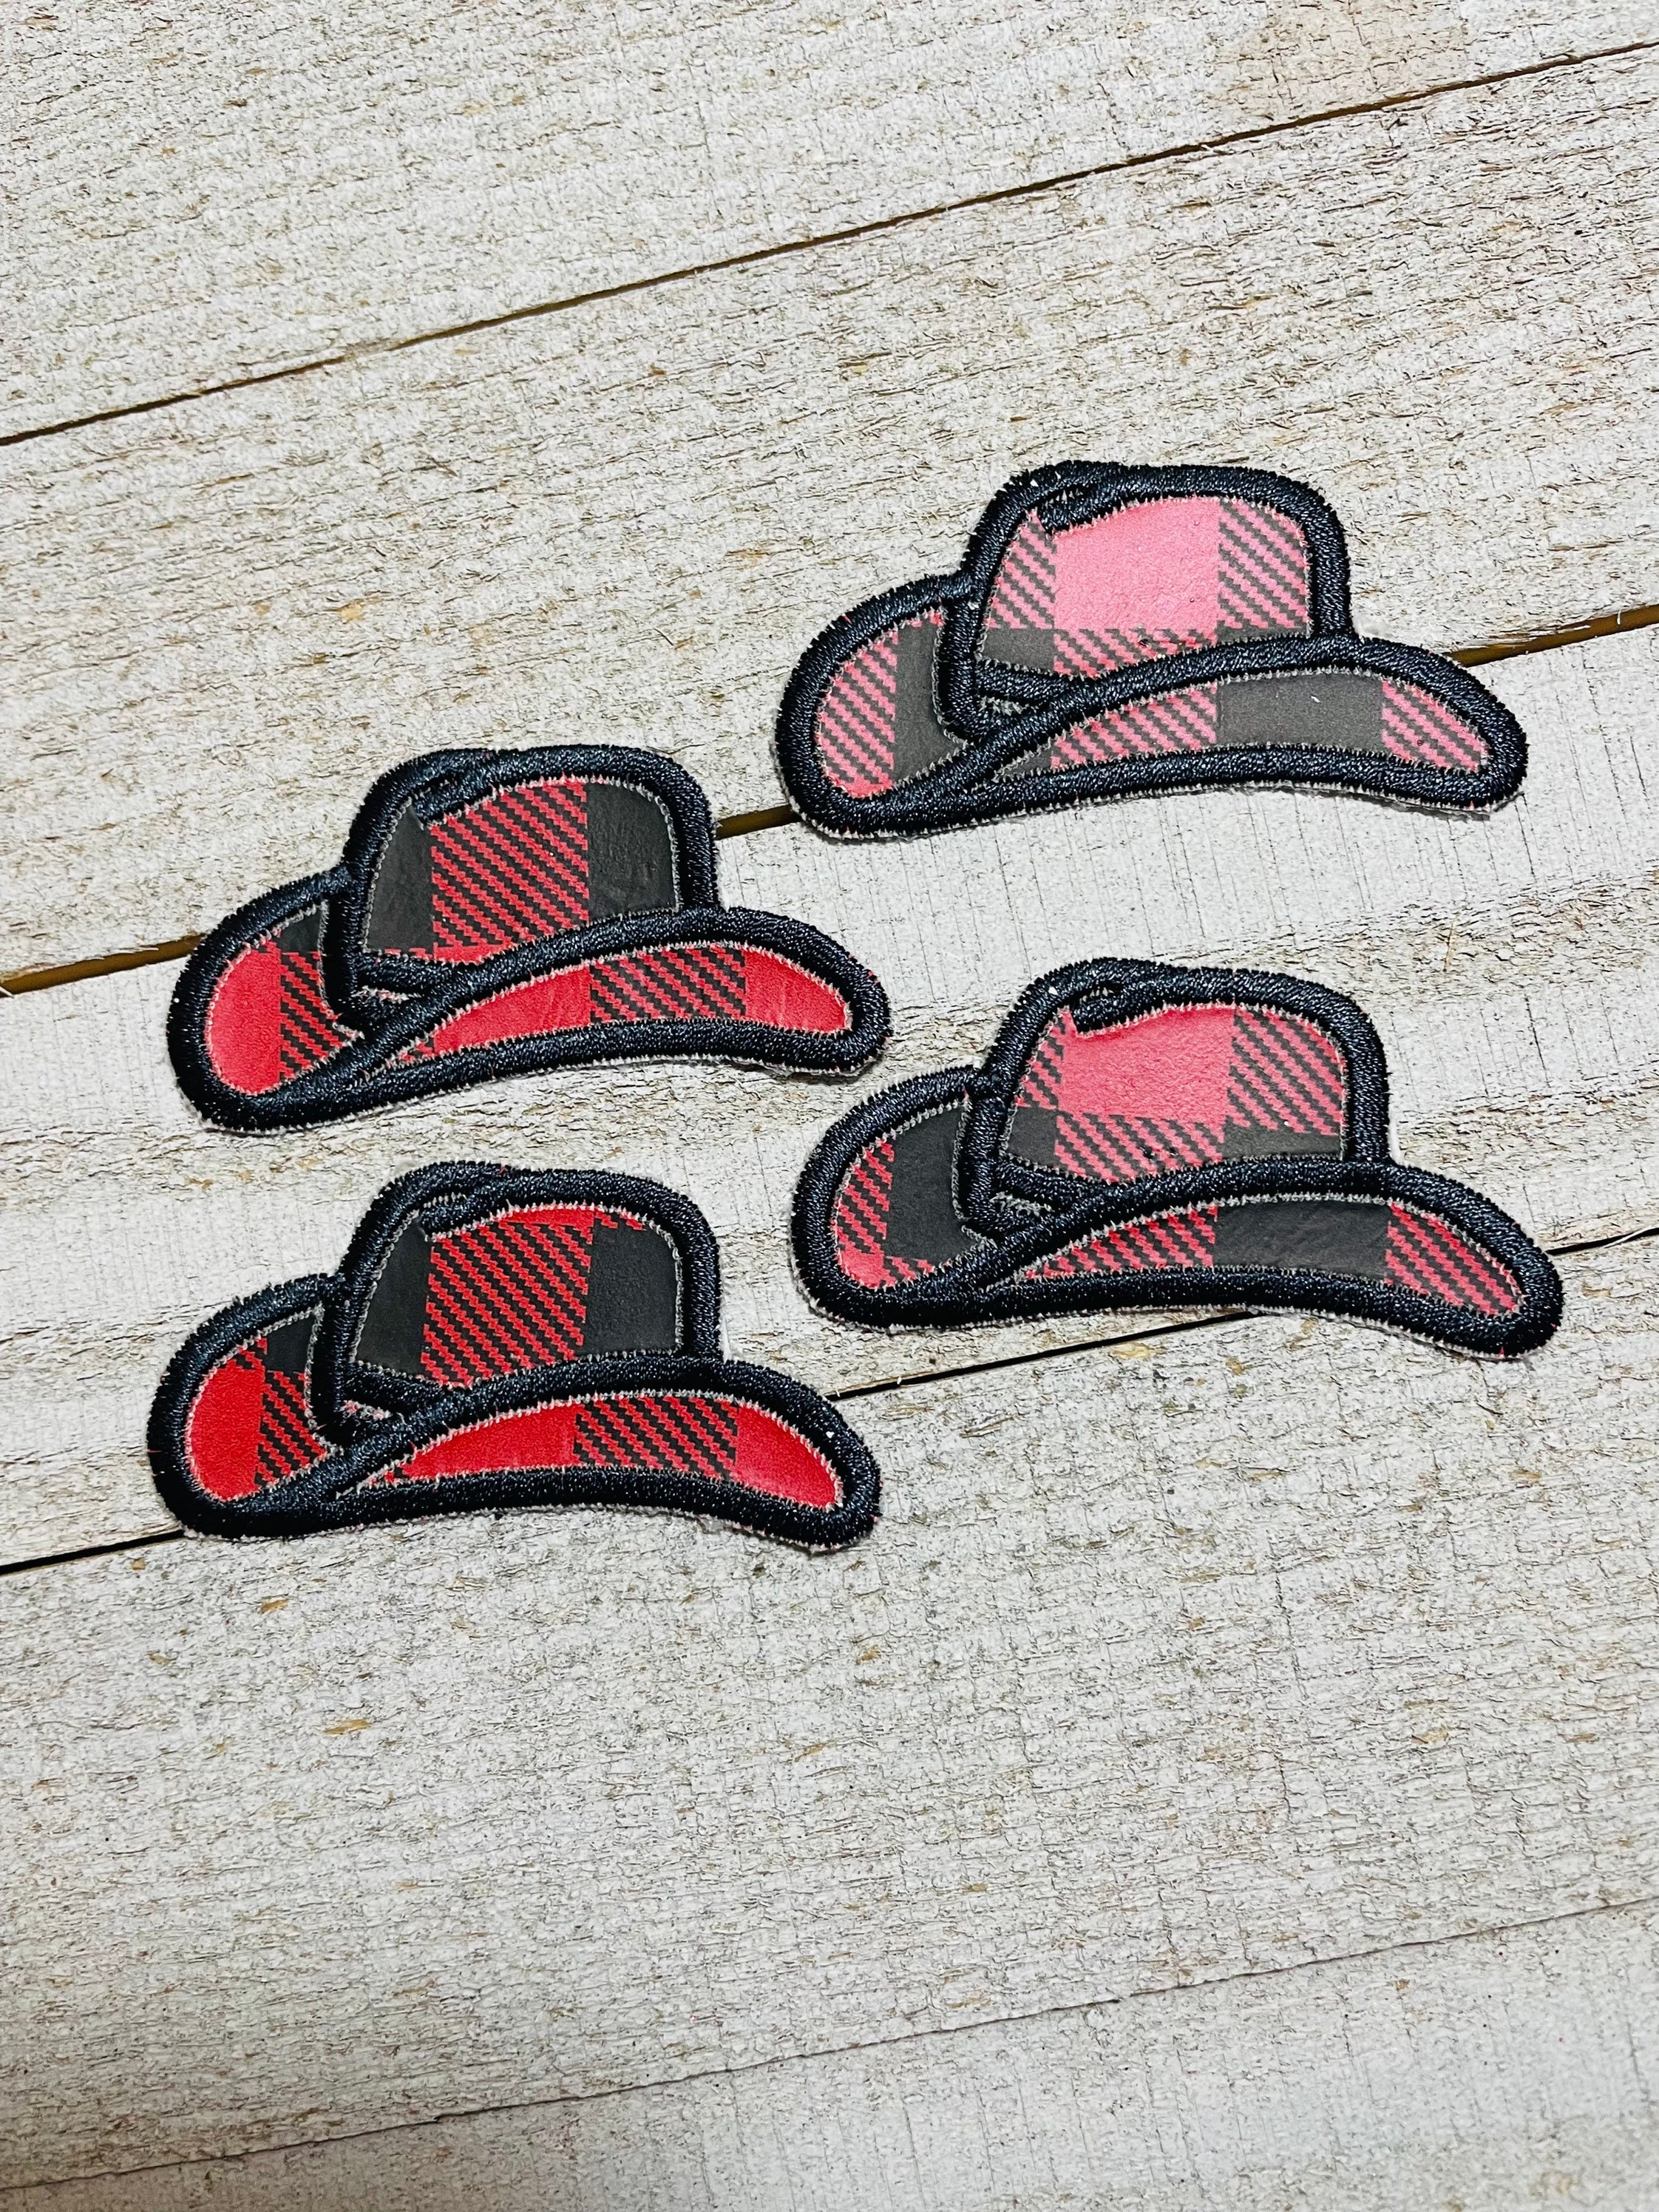 Embroidered Iron on Patch Cowboy Hat Cowgirl Hat Holographic Western BOHO  Yeehaw Patches for Clothing Backpack Hats 